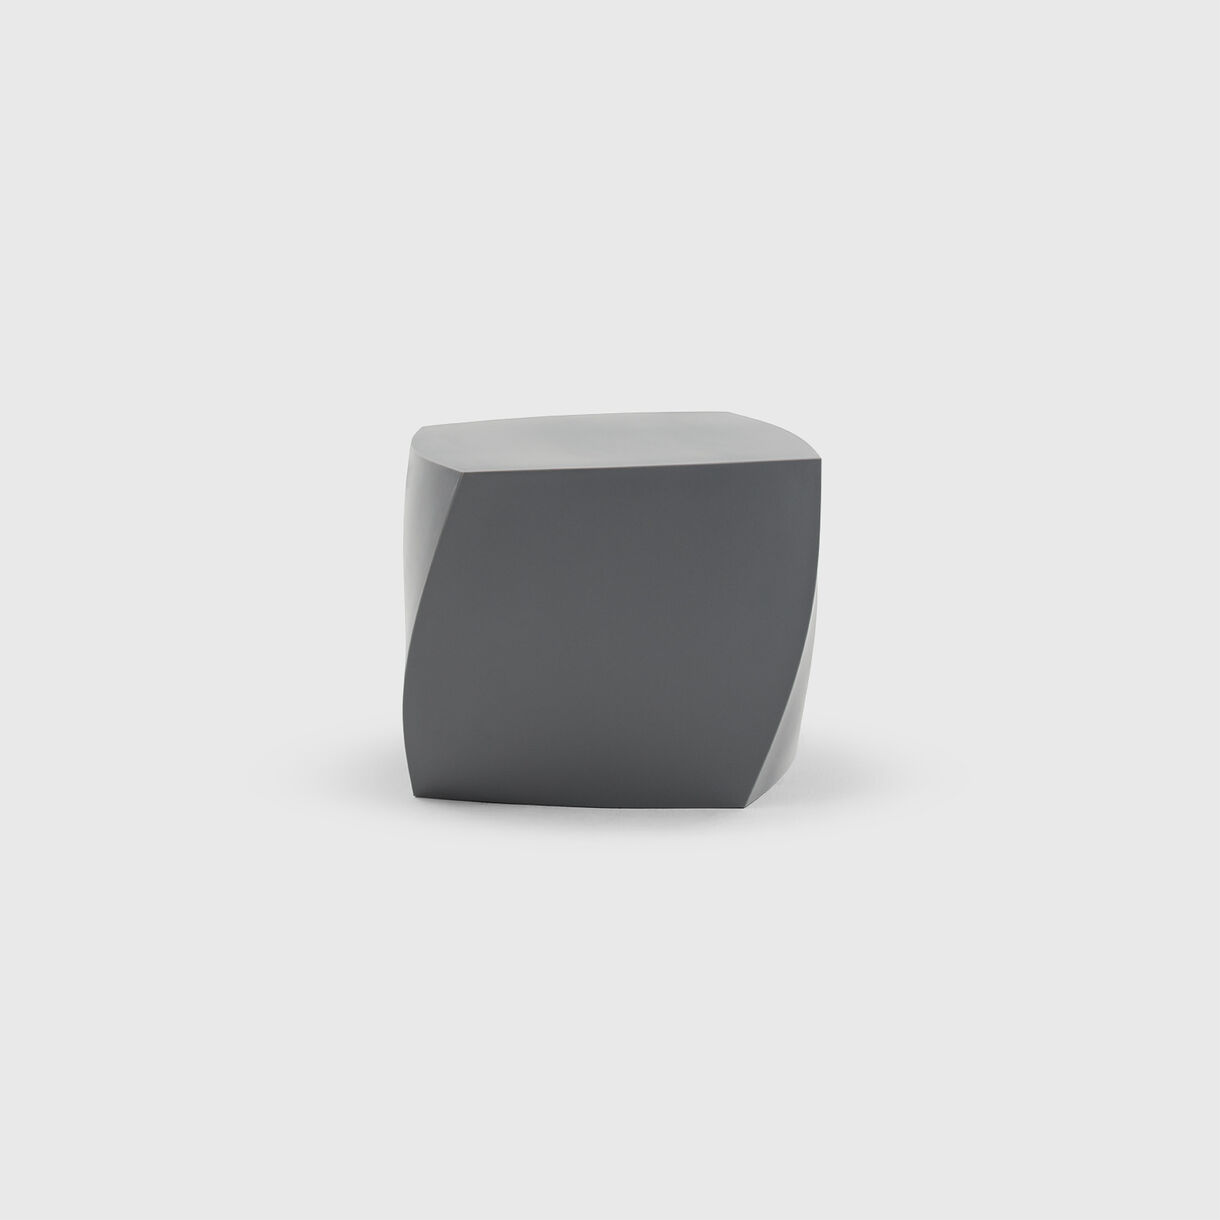 Gehry Left Twist Cube, Silver